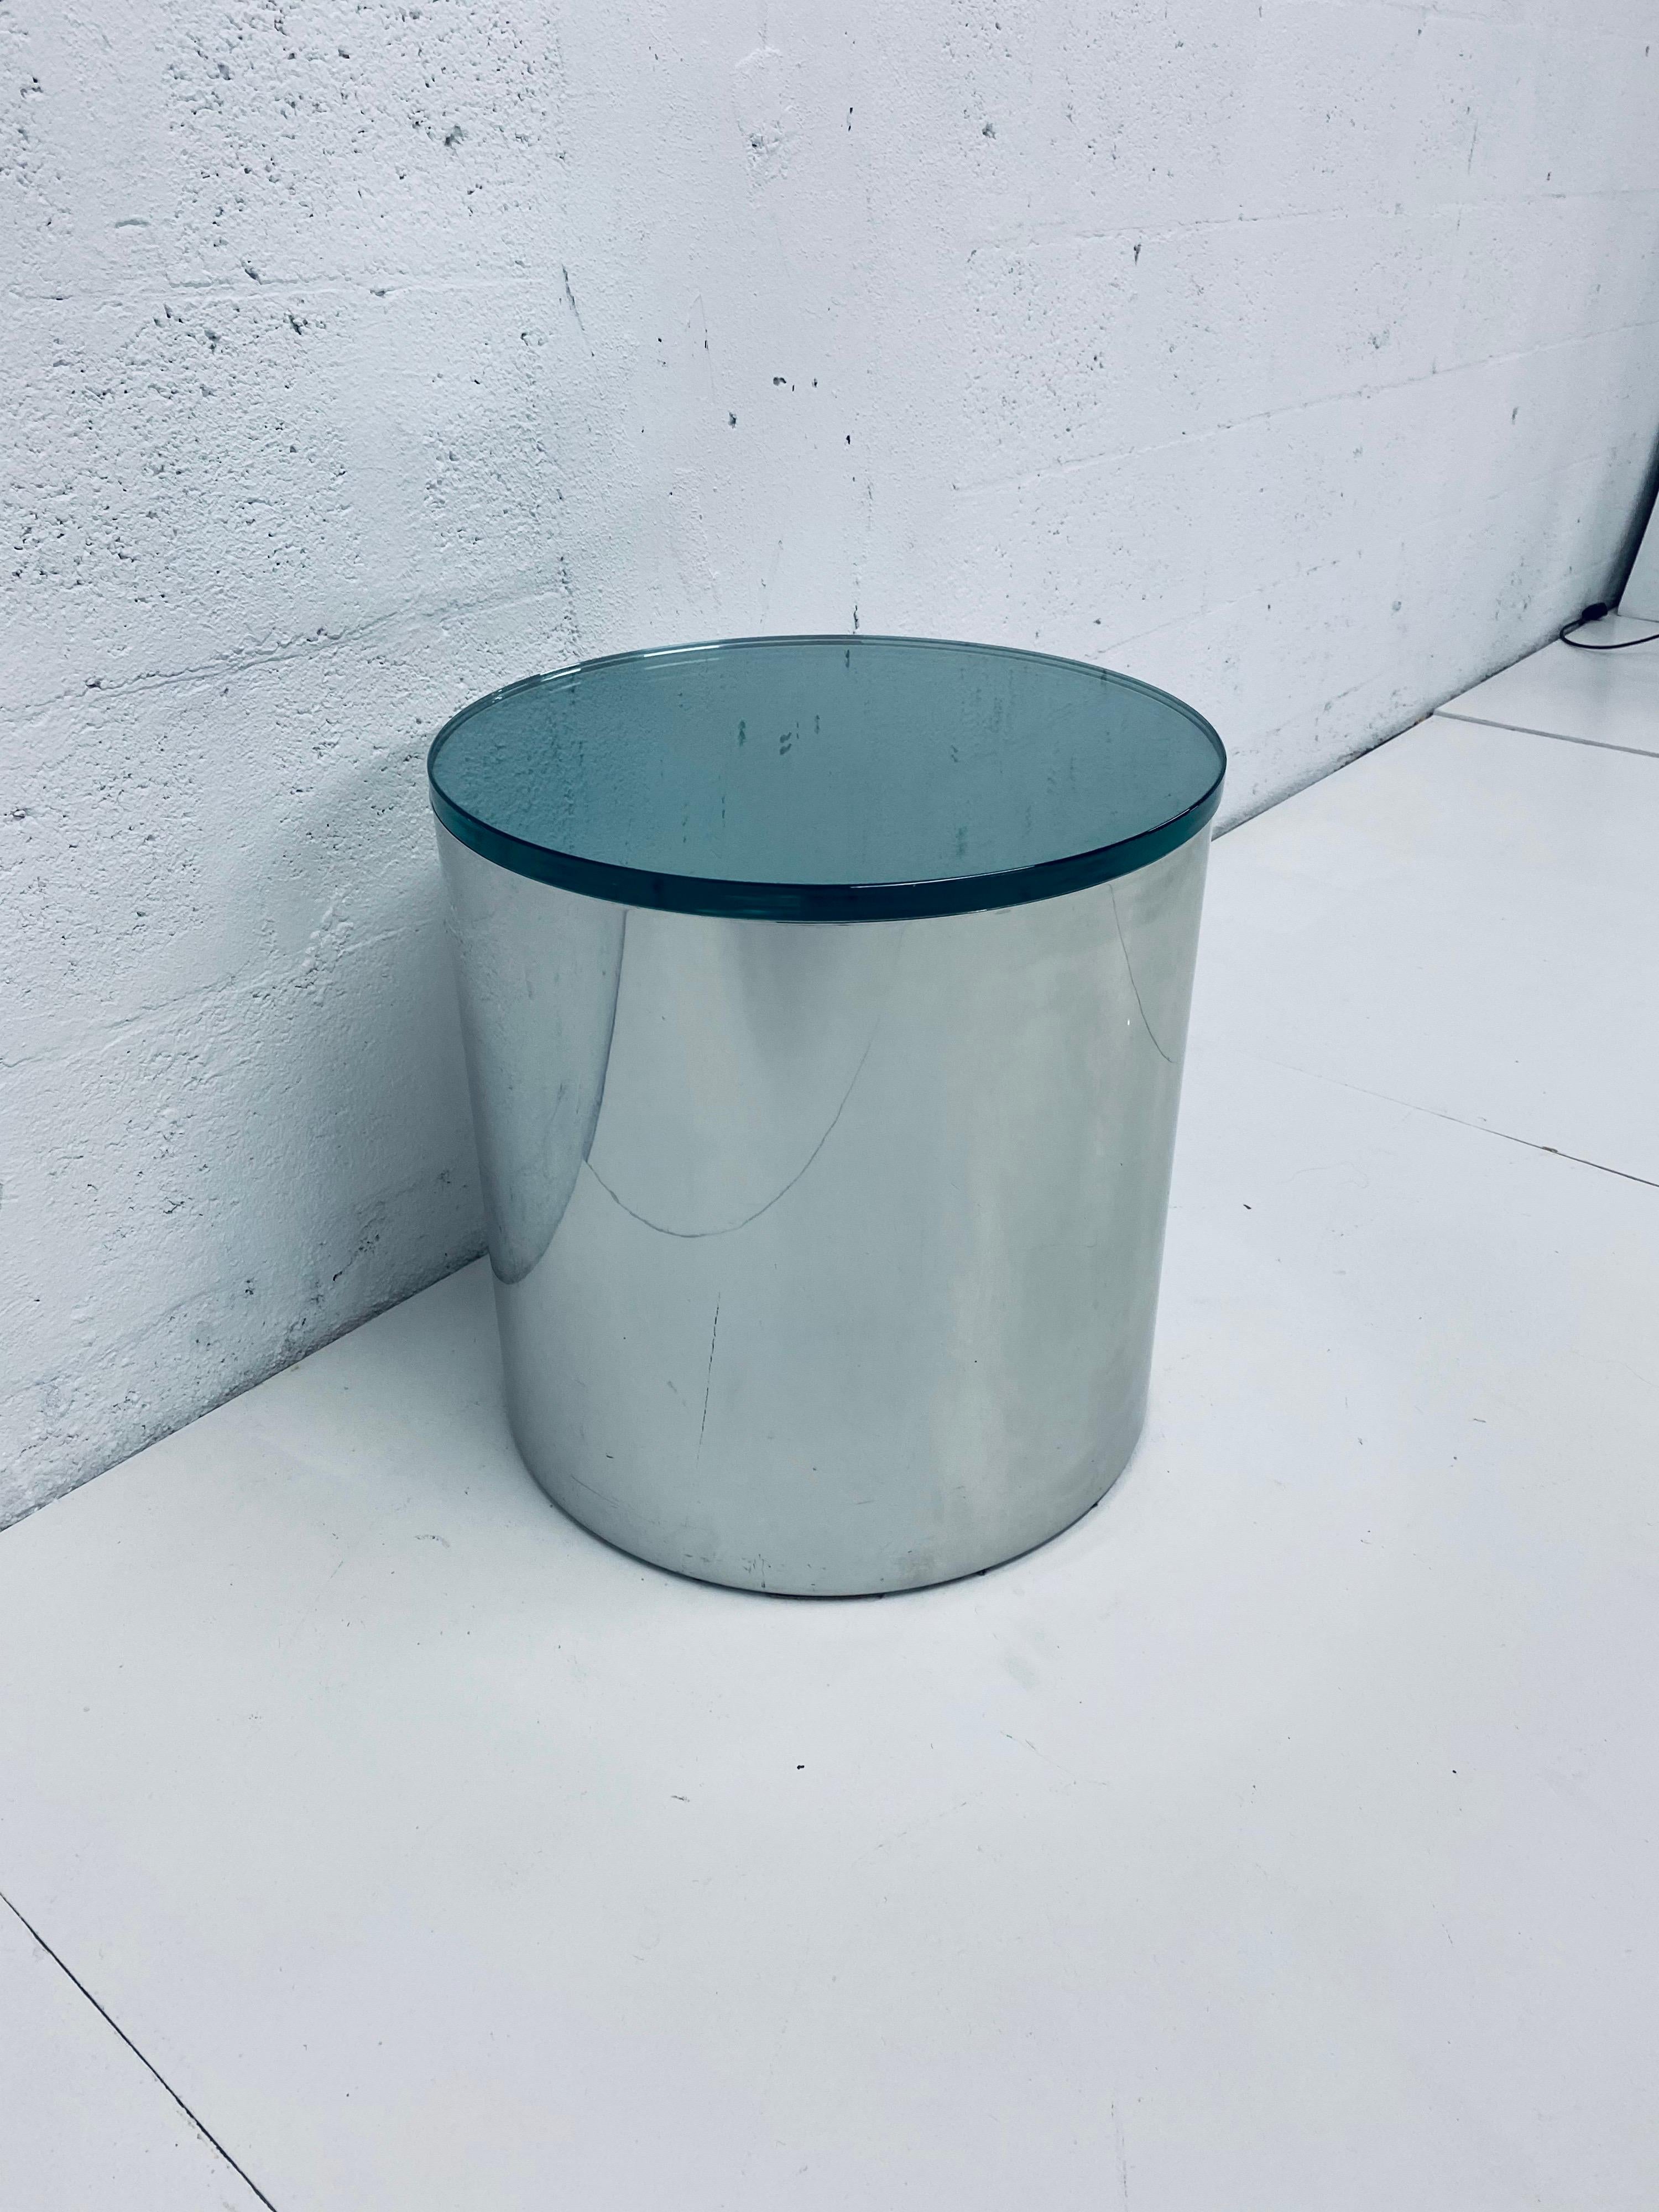 Paul Mayen Polished Steel and Glass Side Table for Habitat, 1970s In Fair Condition For Sale In Miami, FL